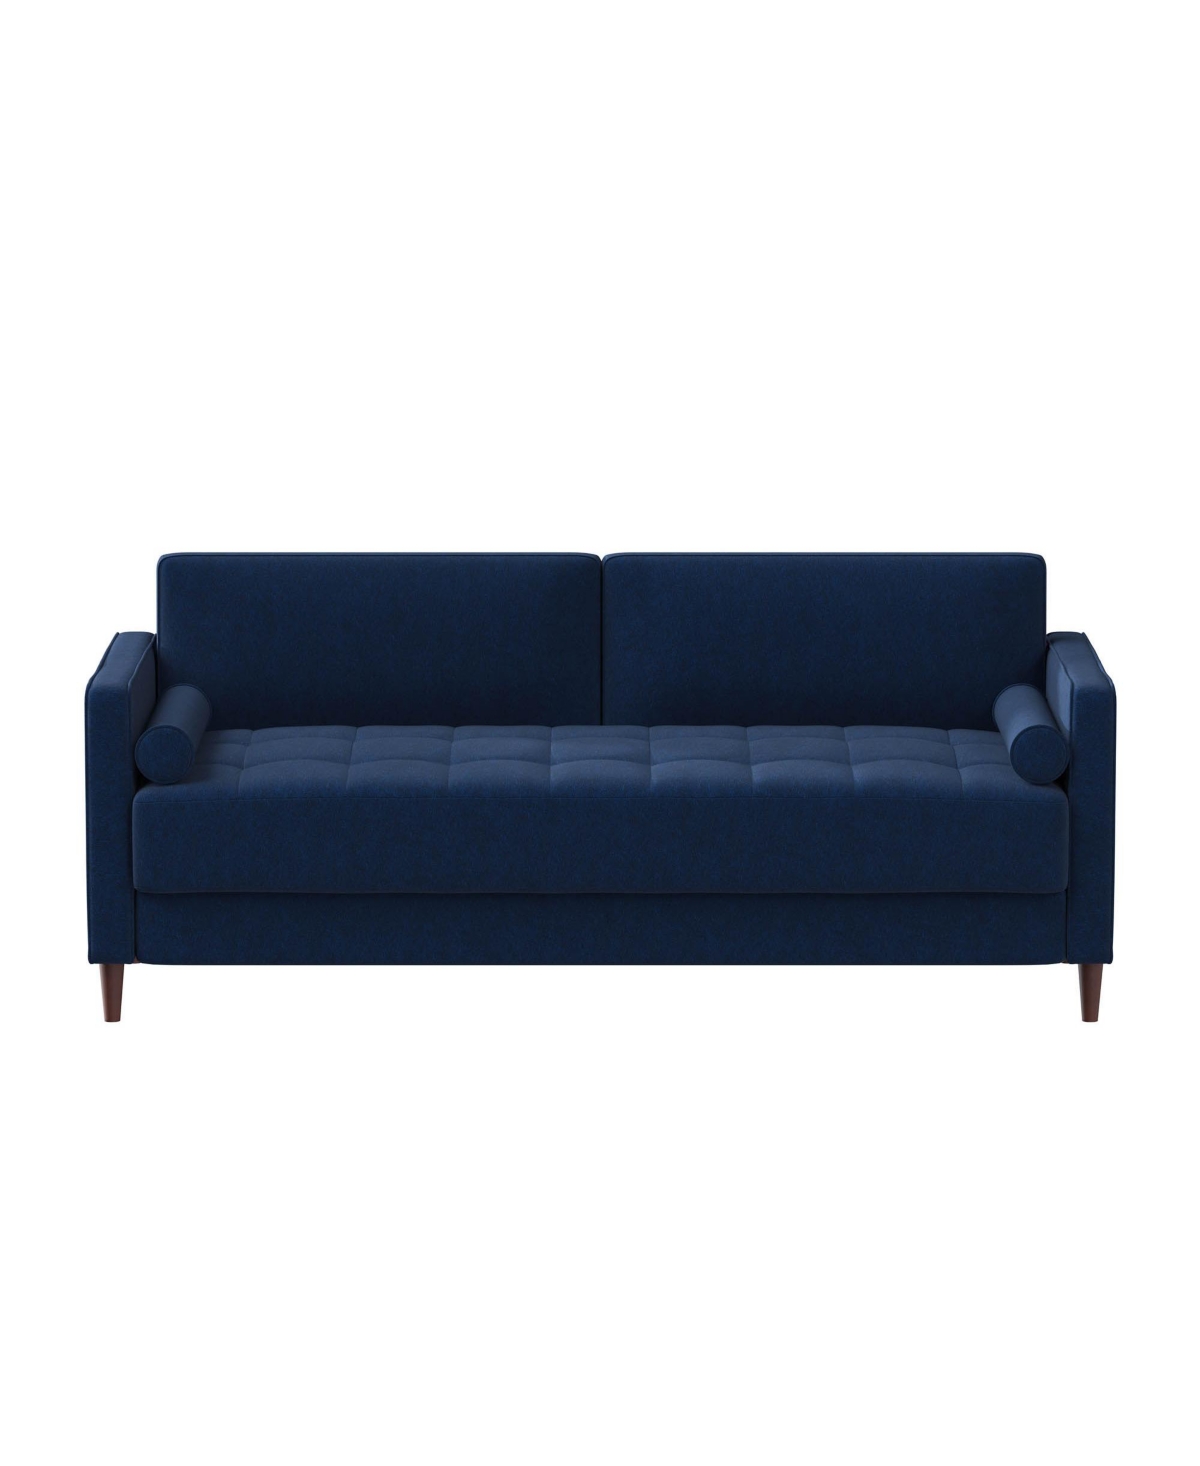 Lifestyle Solutions Lillith Sofa In Navy